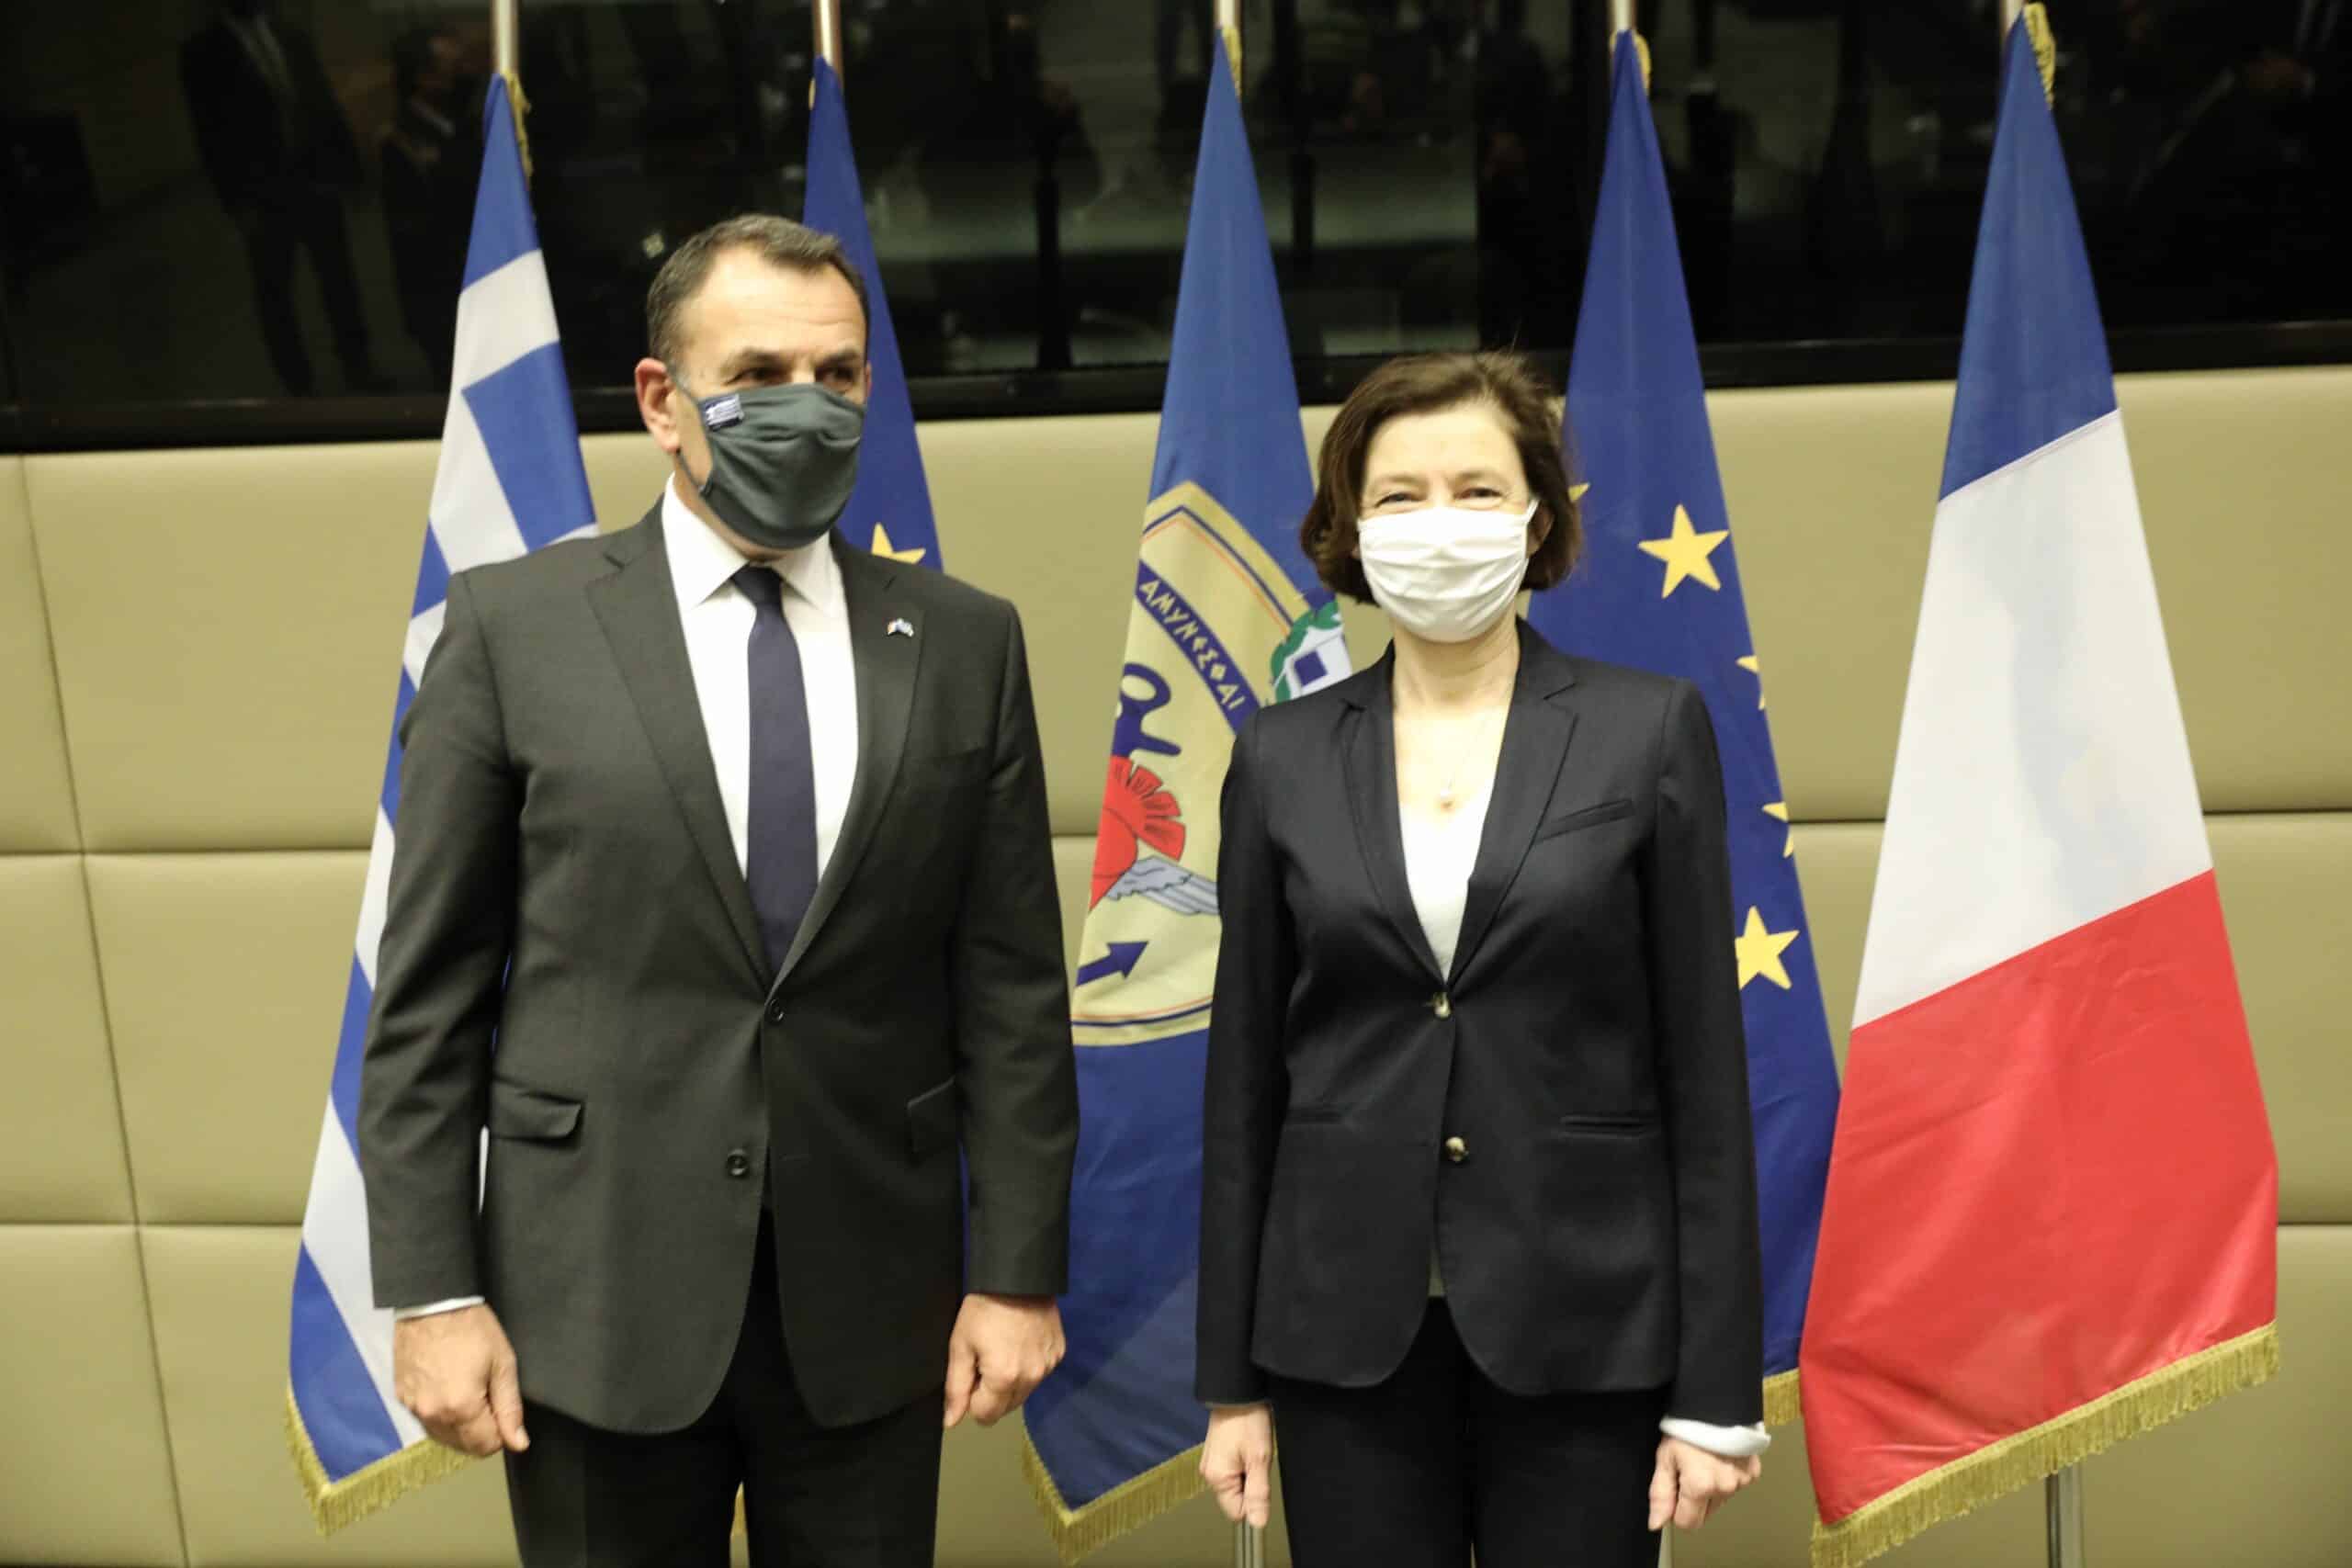 Greece Greek Defense Minister Nikos Panagiotopoulos with his French counterpart Florence Parly.